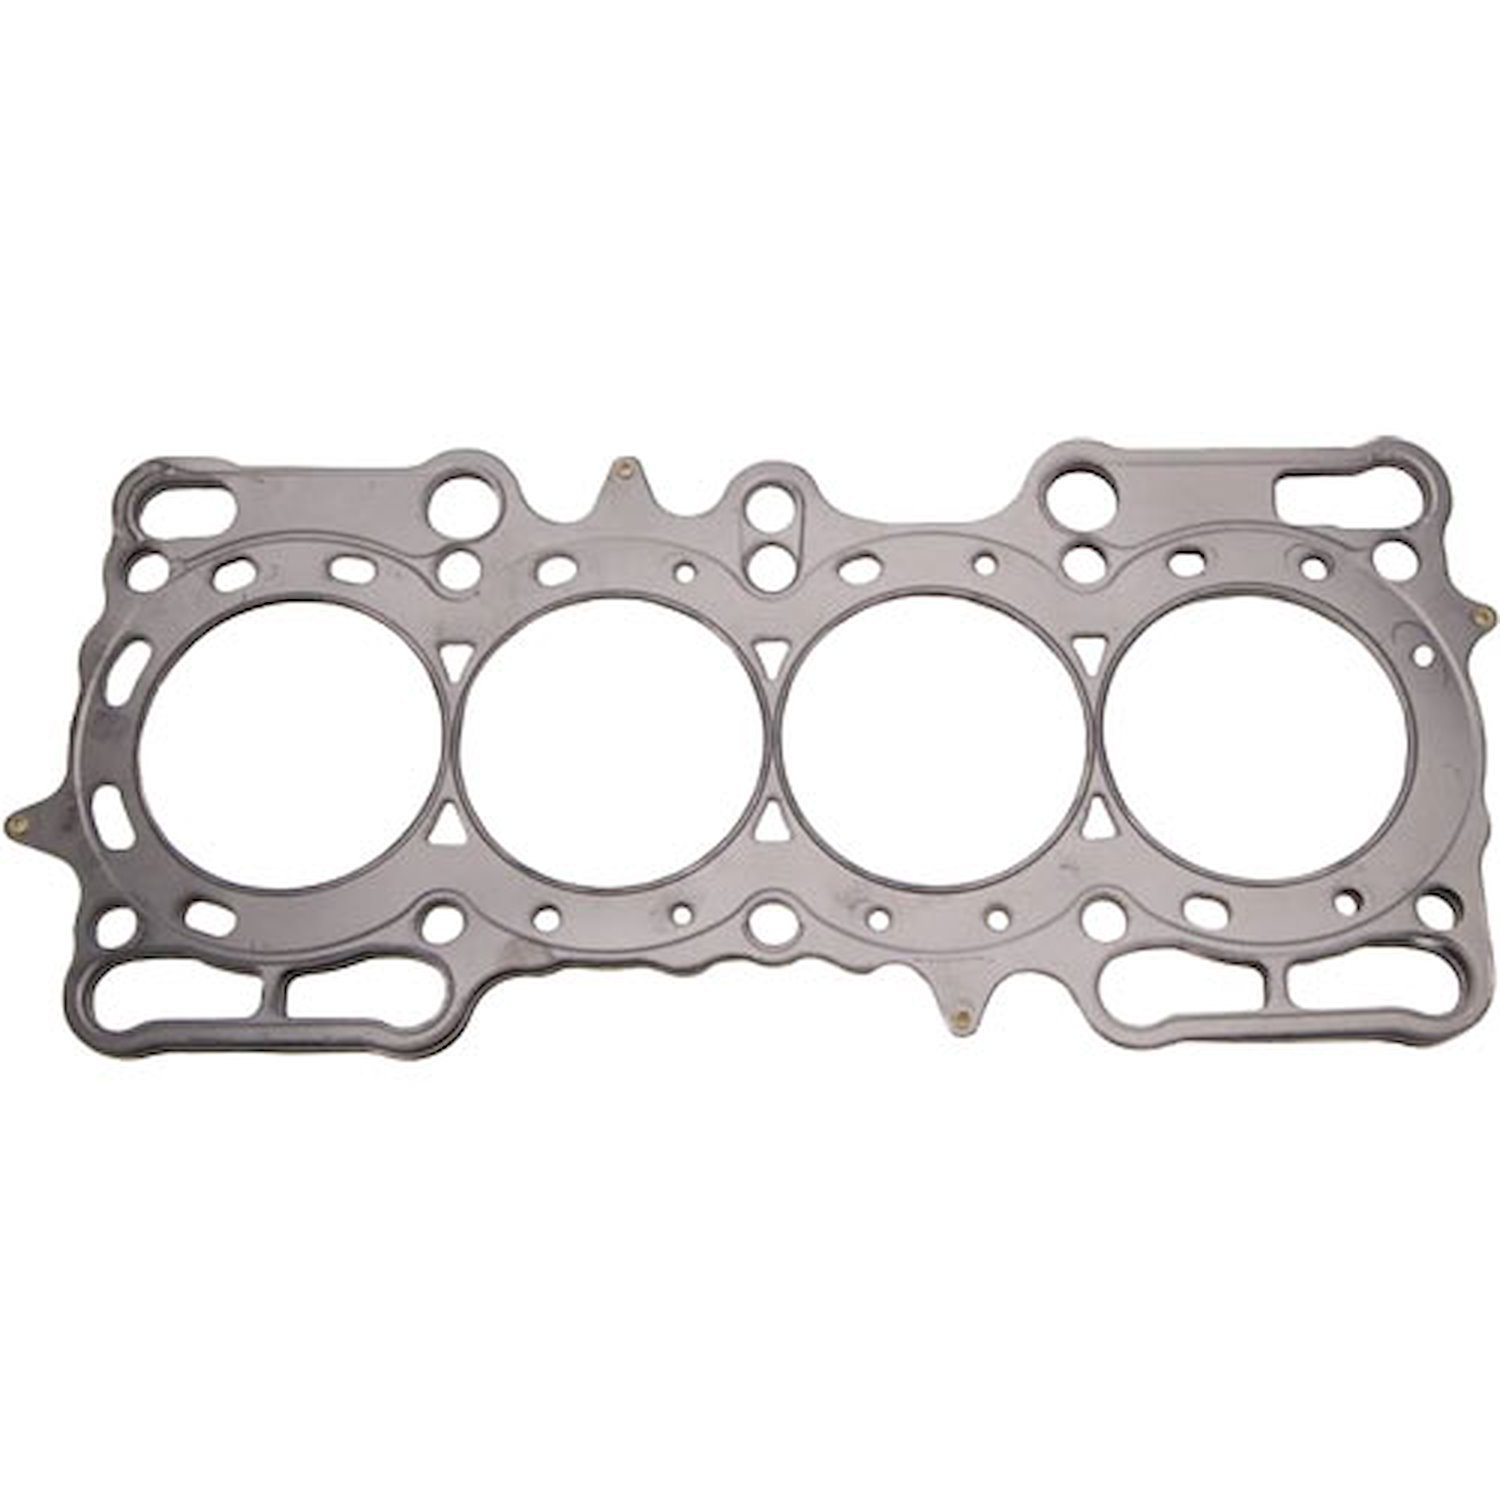 Head Gasket for 1997-2001 Honda Prelude with H22A4, H22A7 Engines